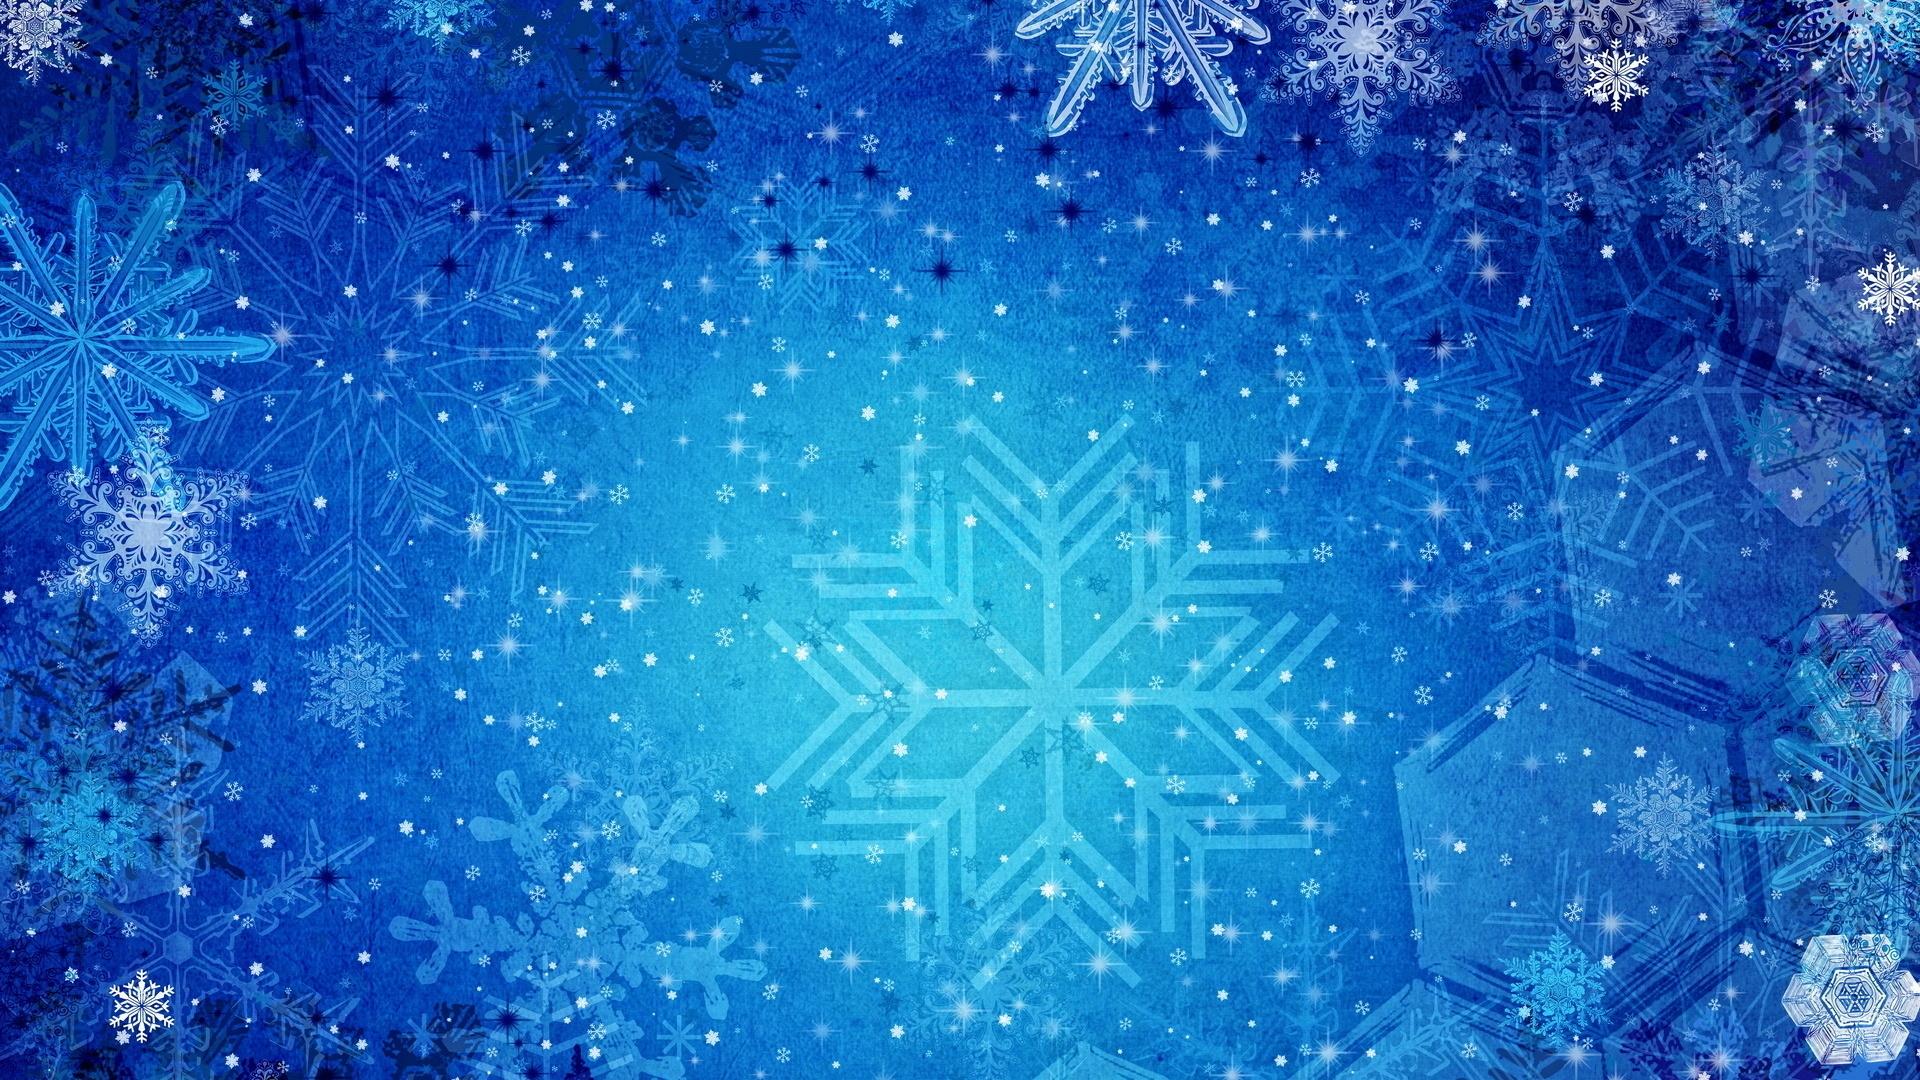 Snowflakes, Blue, Patterns - Snowflakes Pattern Background - HD Wallpaper 